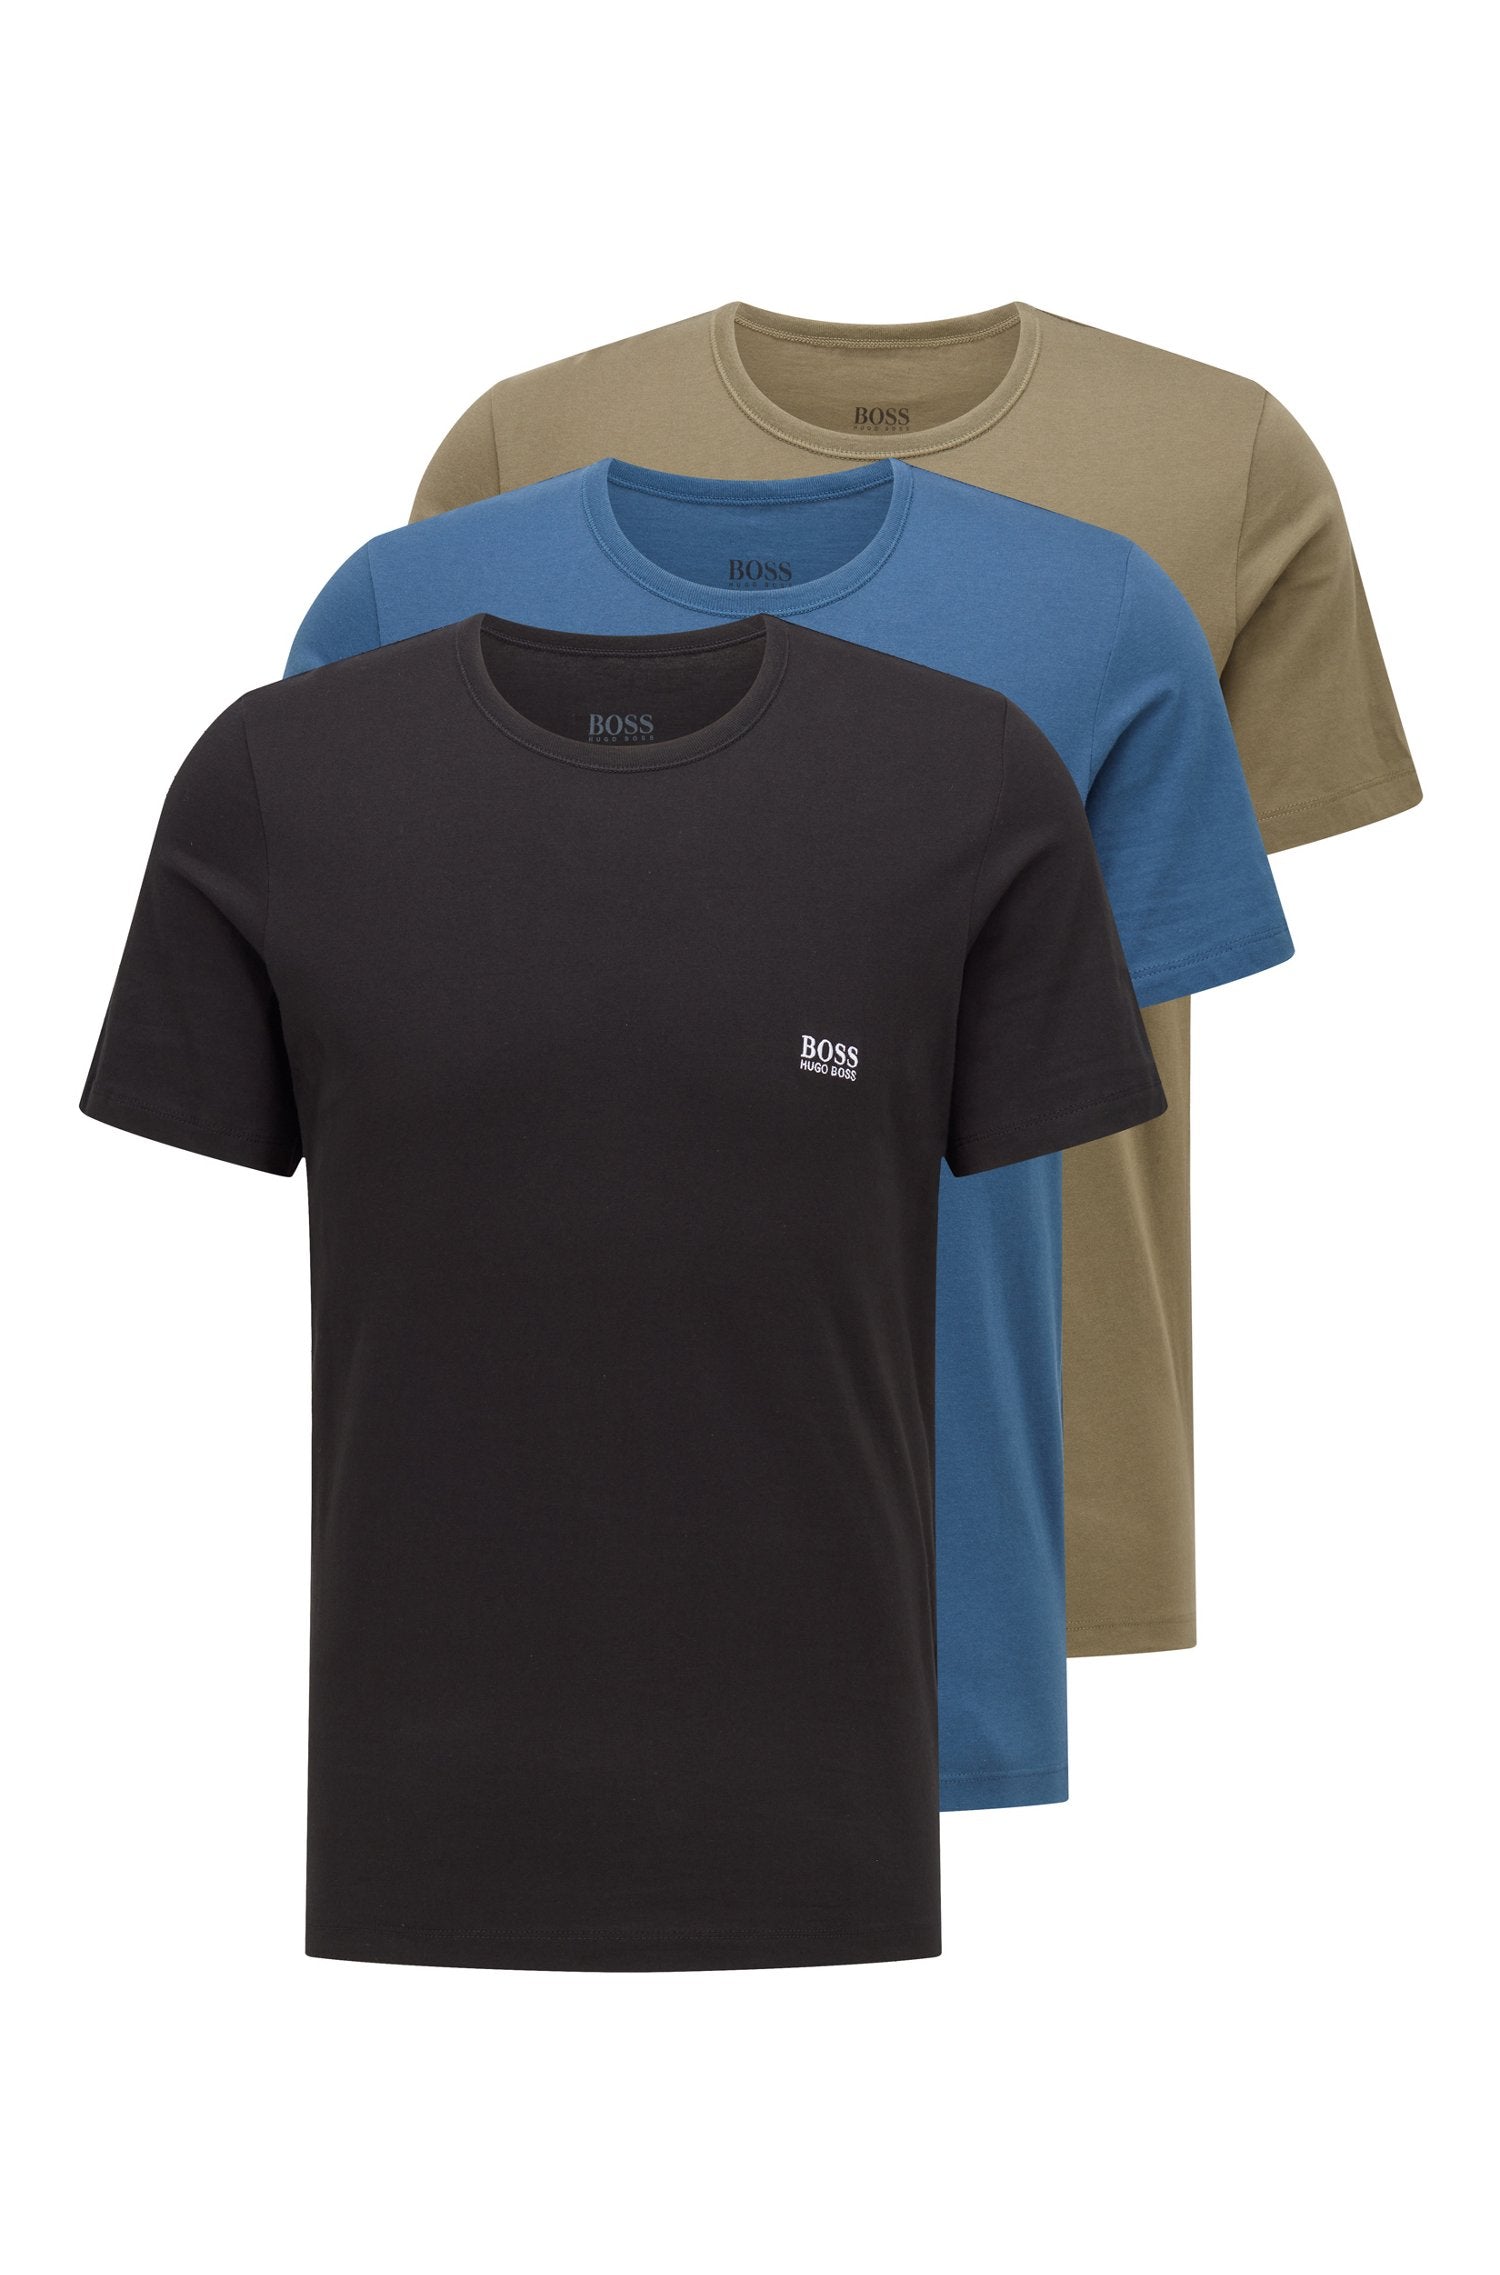 BOSS - 3-Pack Of Boxed Regular-Fit Cotton T-Shirts in Seasonal Colours 50325887 974